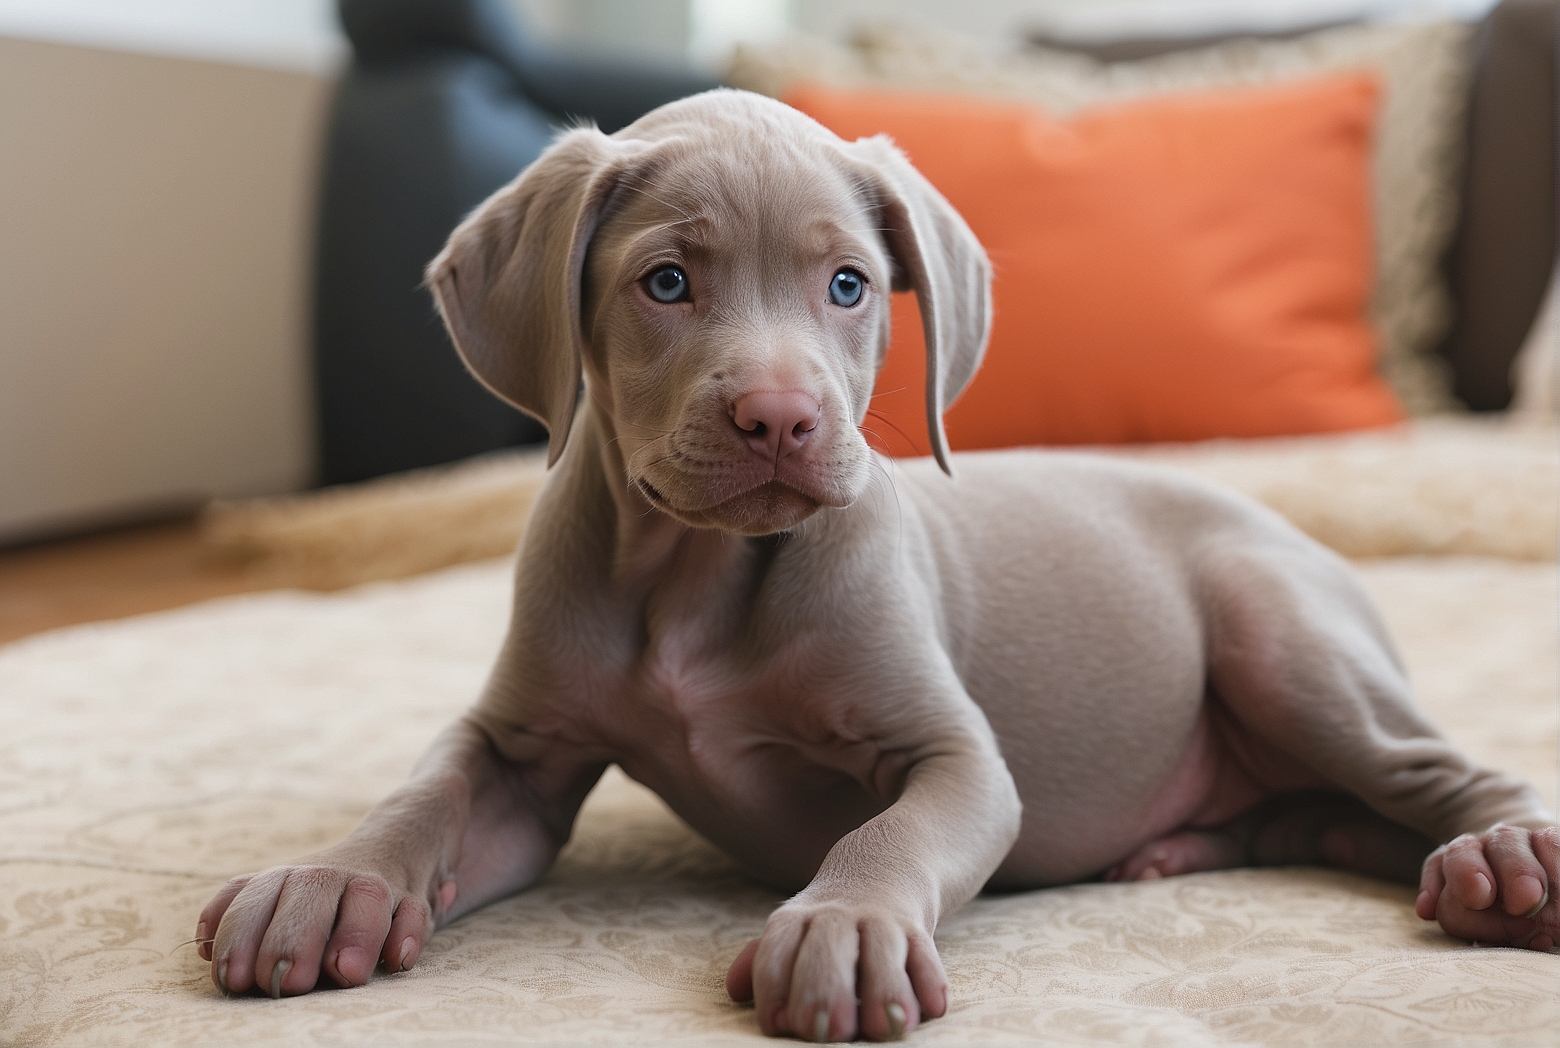 How Much Does a Weimaraner Puppy Cost?